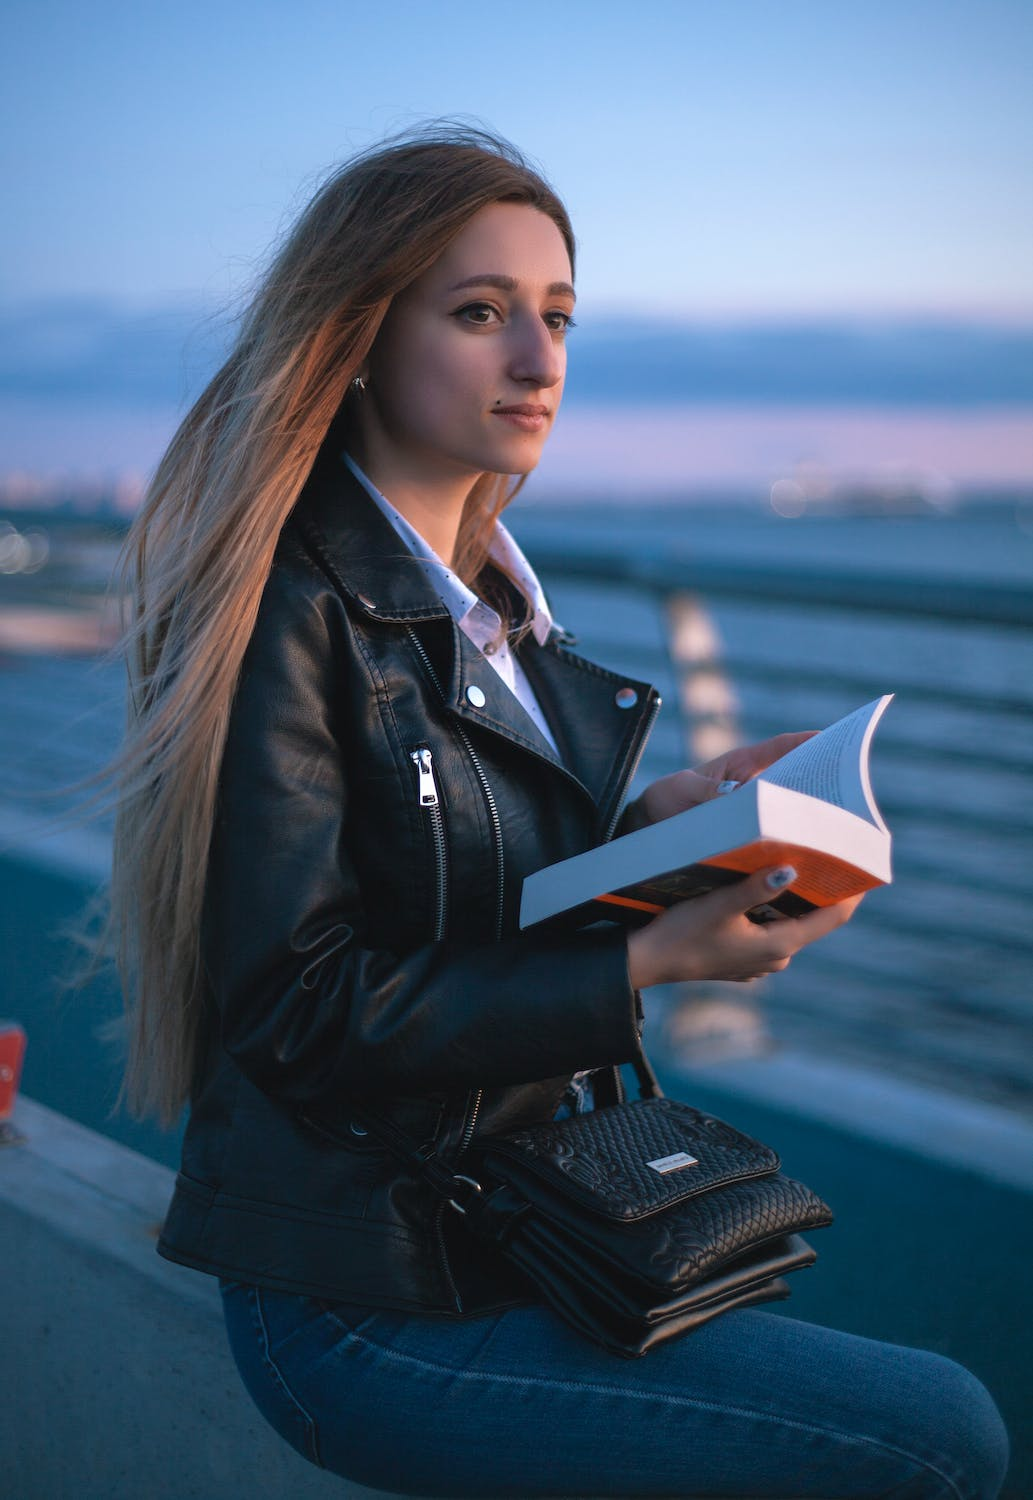 Woman Wearing Leather Jacket and Holding Book